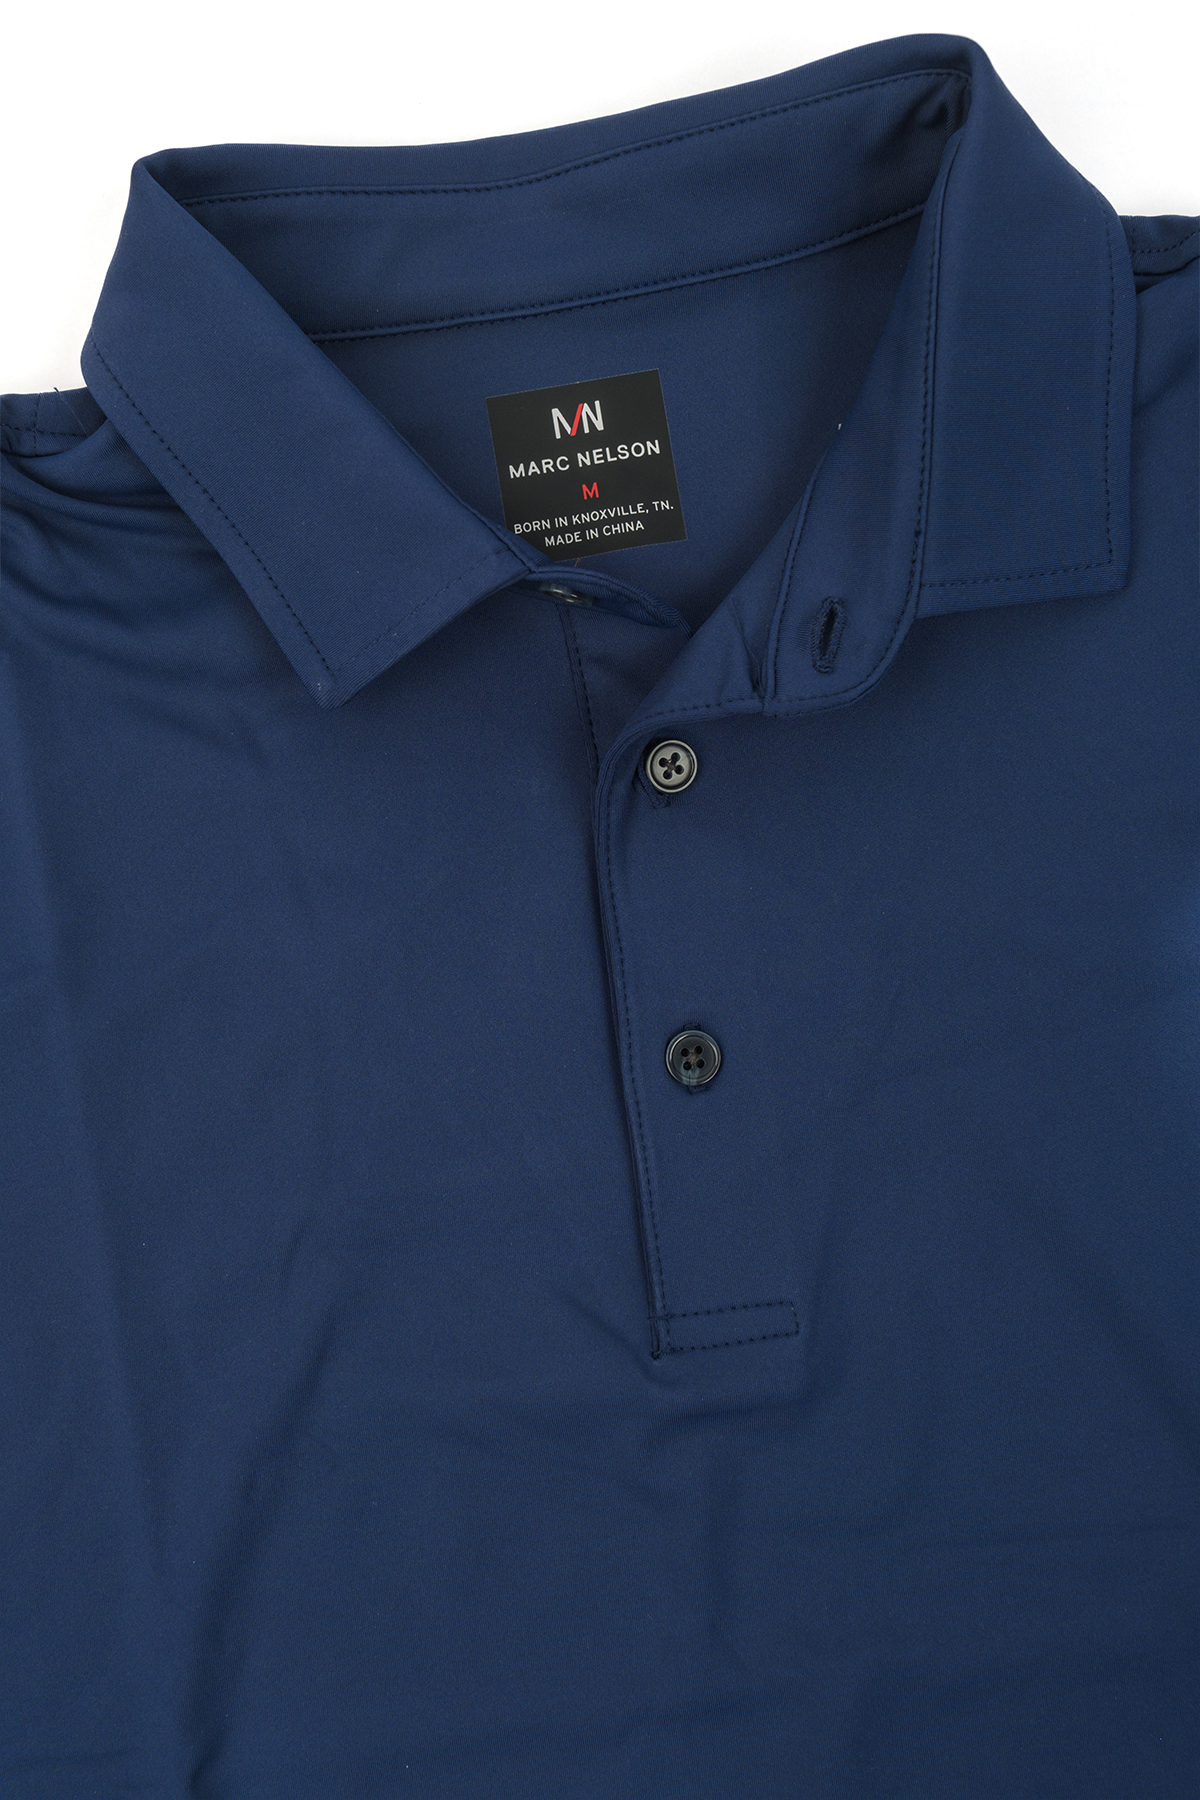 Close up photo of navy golf polo showing the details including the collar and button. 